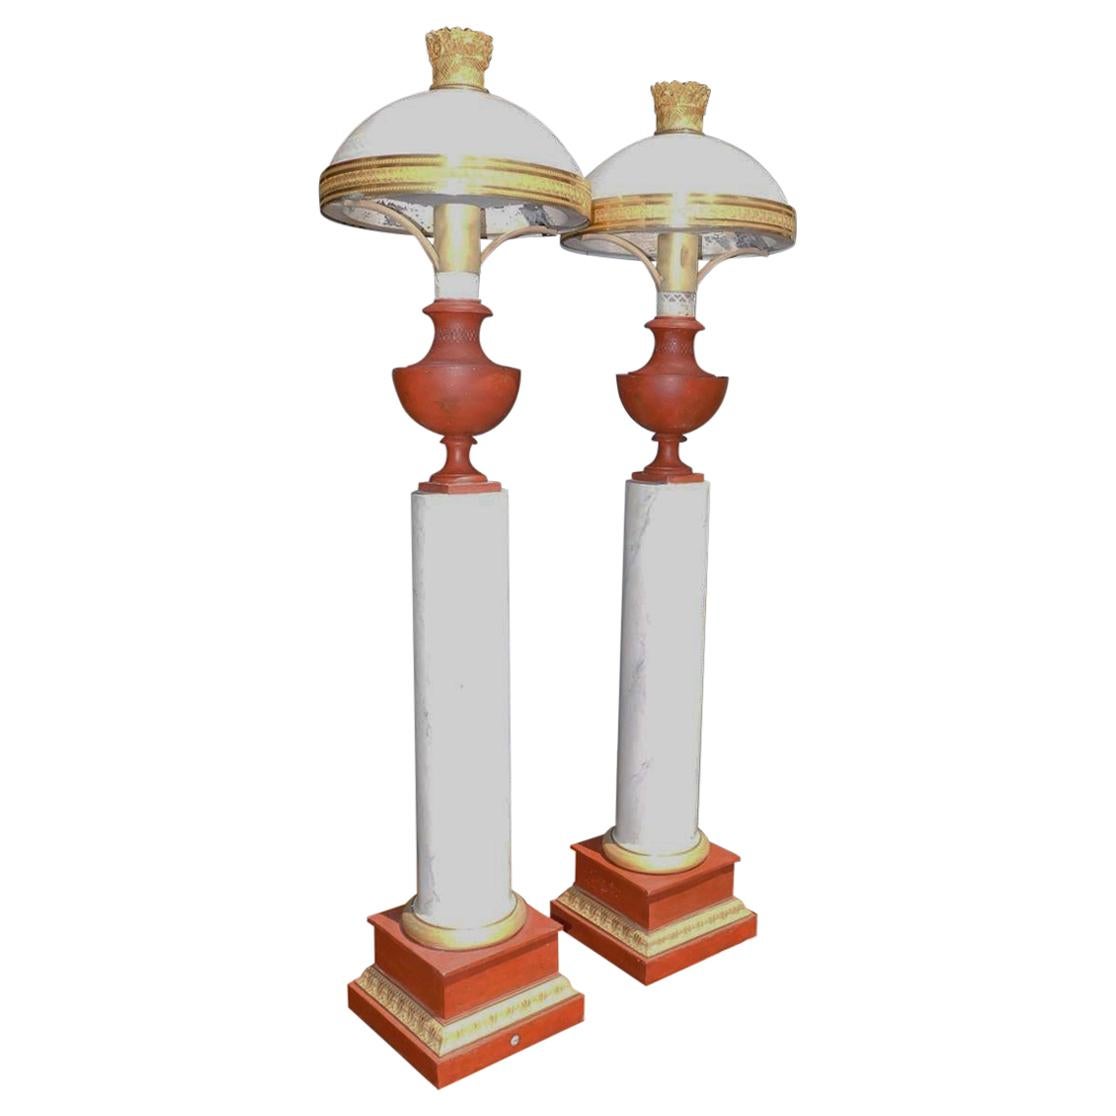 Pair of French Tole and Faux Marble Column Table Lamps, Originally Oil, C. 1820